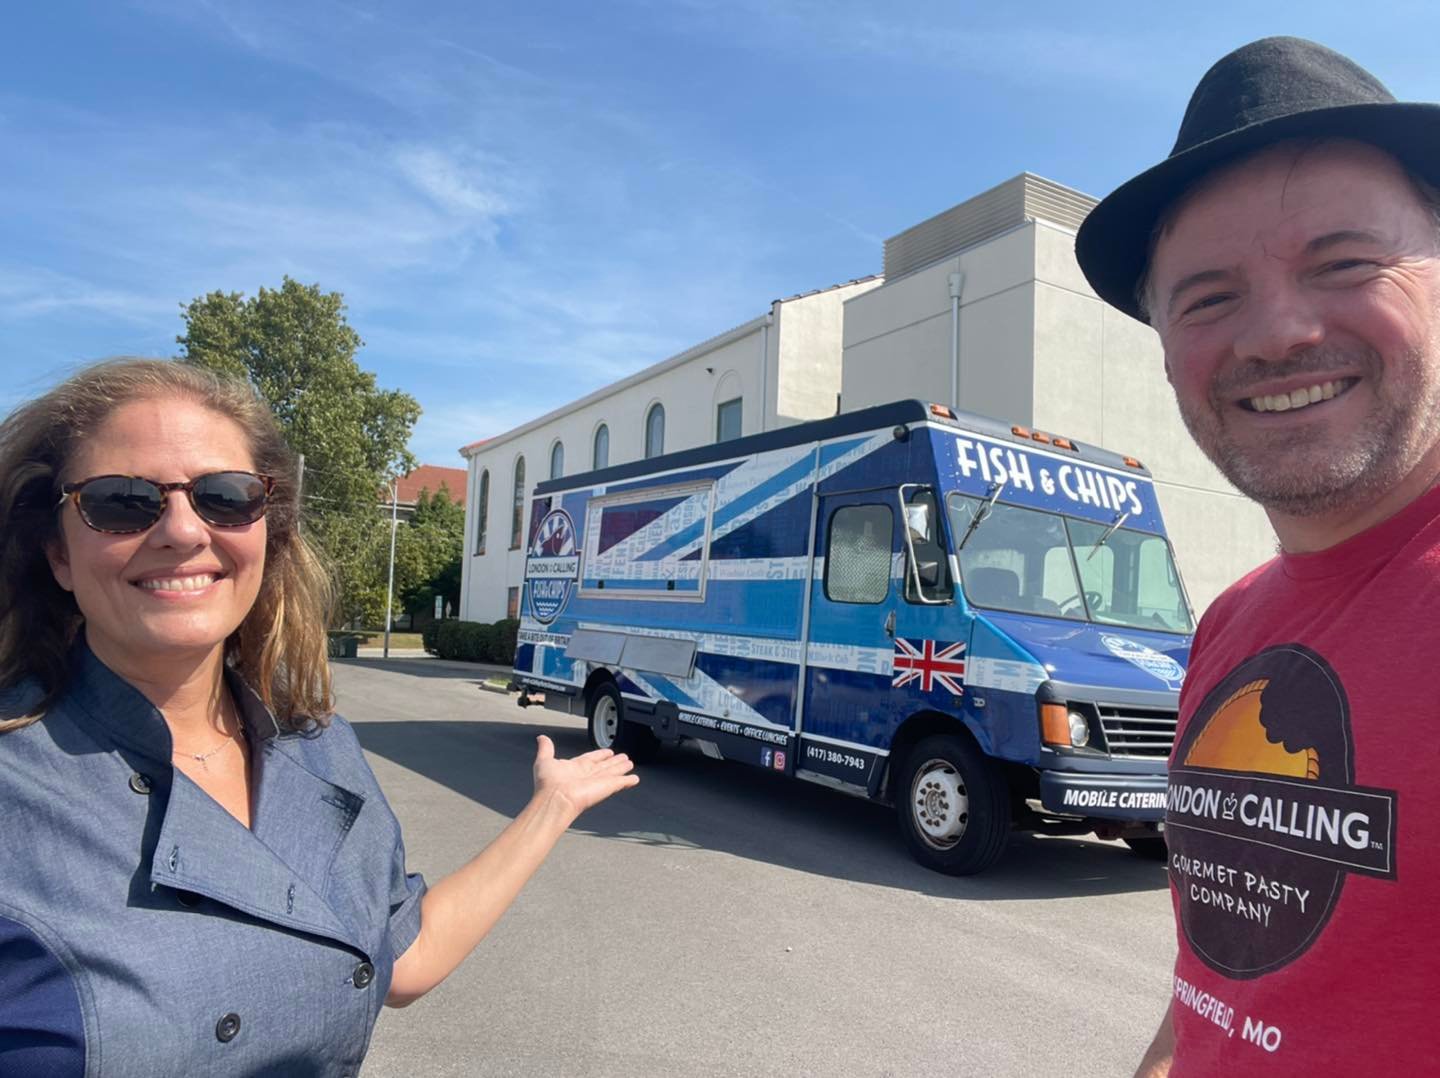 London Calling Pasty Co. owners Carrie Mitchell and Neil Gomme are debuting a new fish and chips food truck.